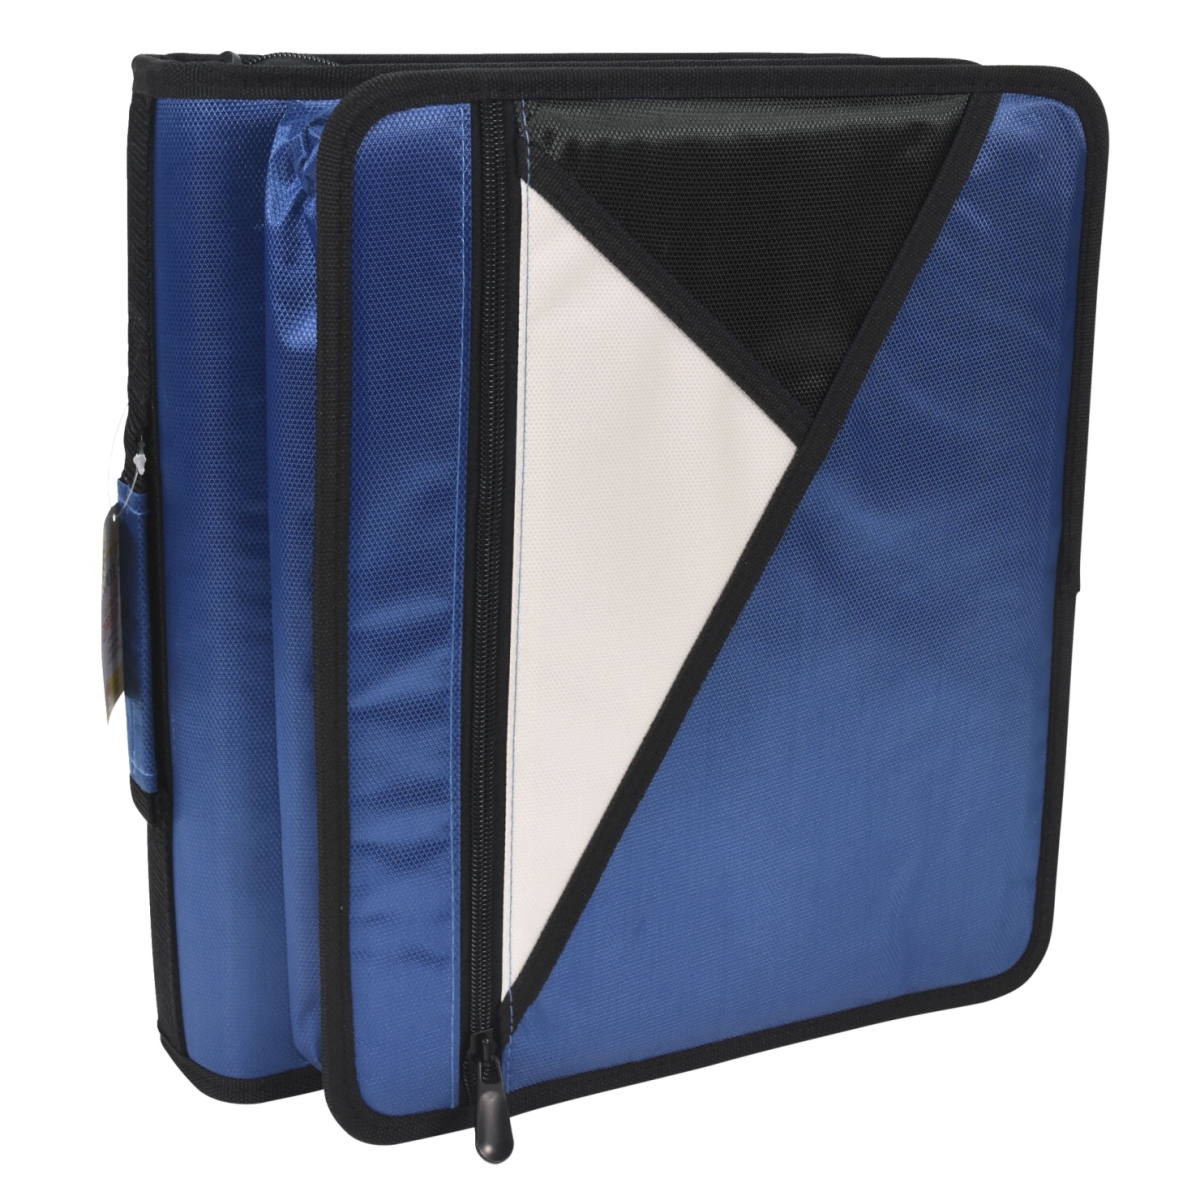 2019455 2 In. Round Ring Zipper Binder With Laptop Compartment, Blue